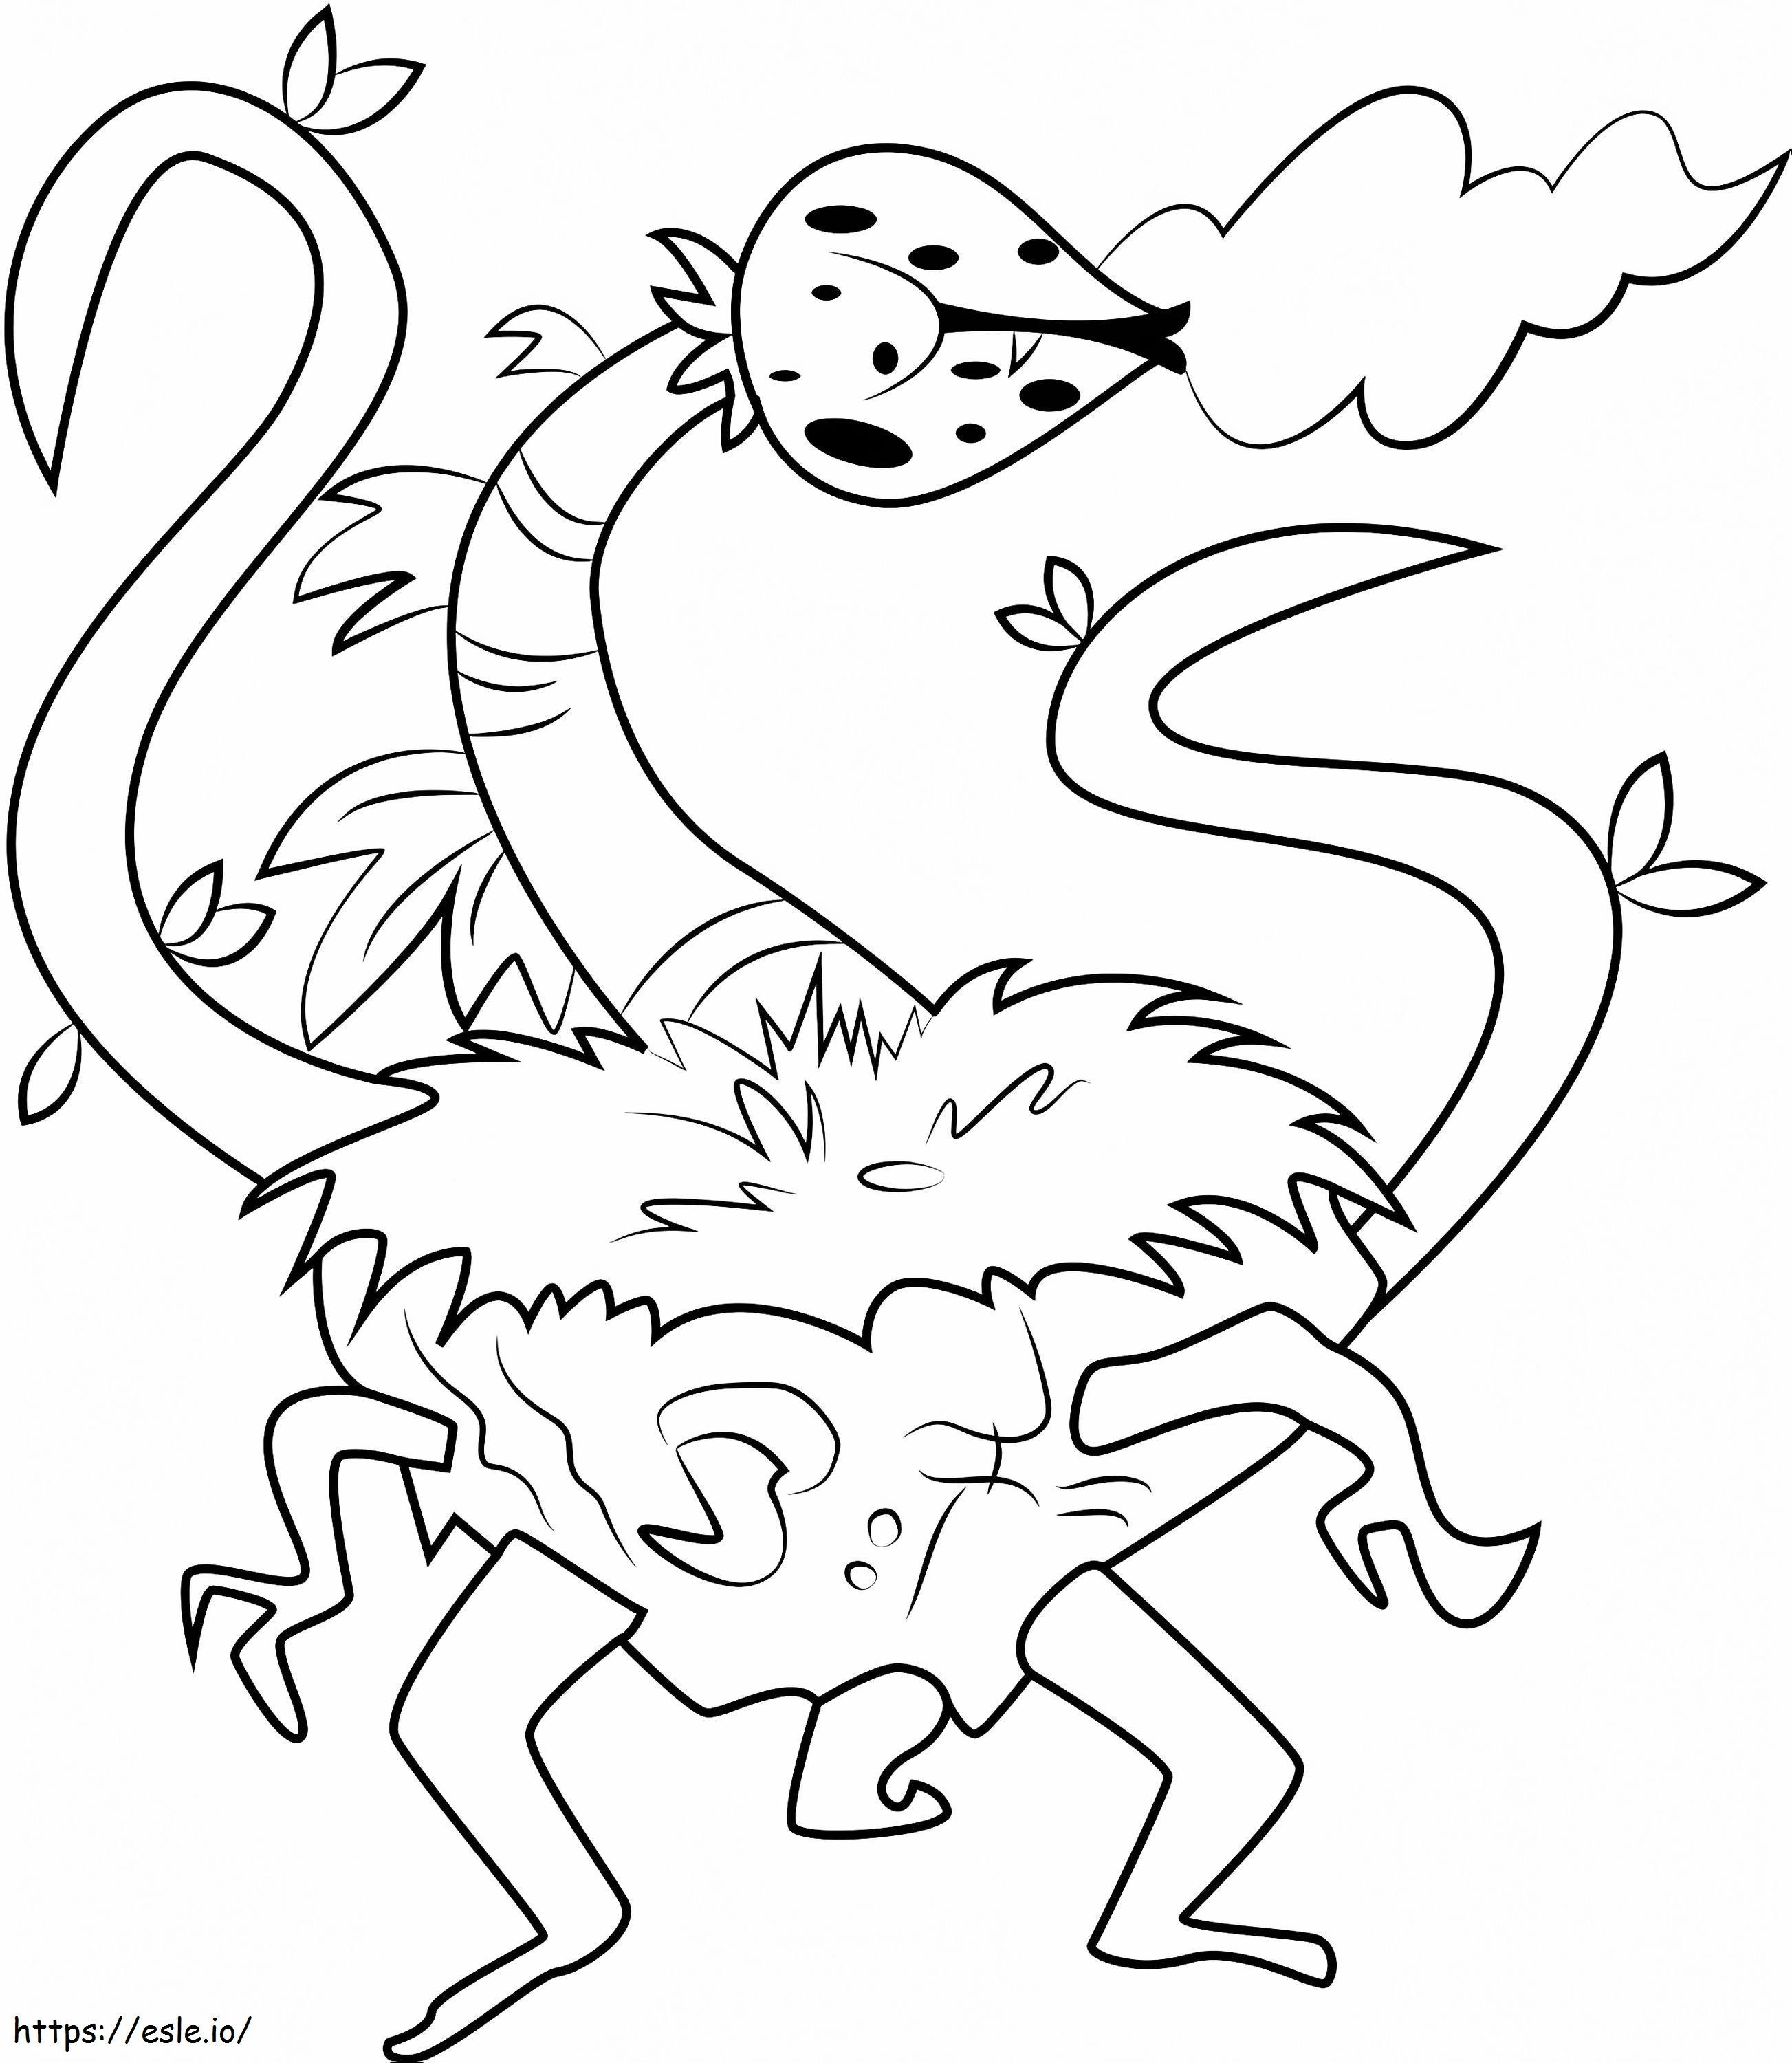 1530753701 Larry A4 coloring page